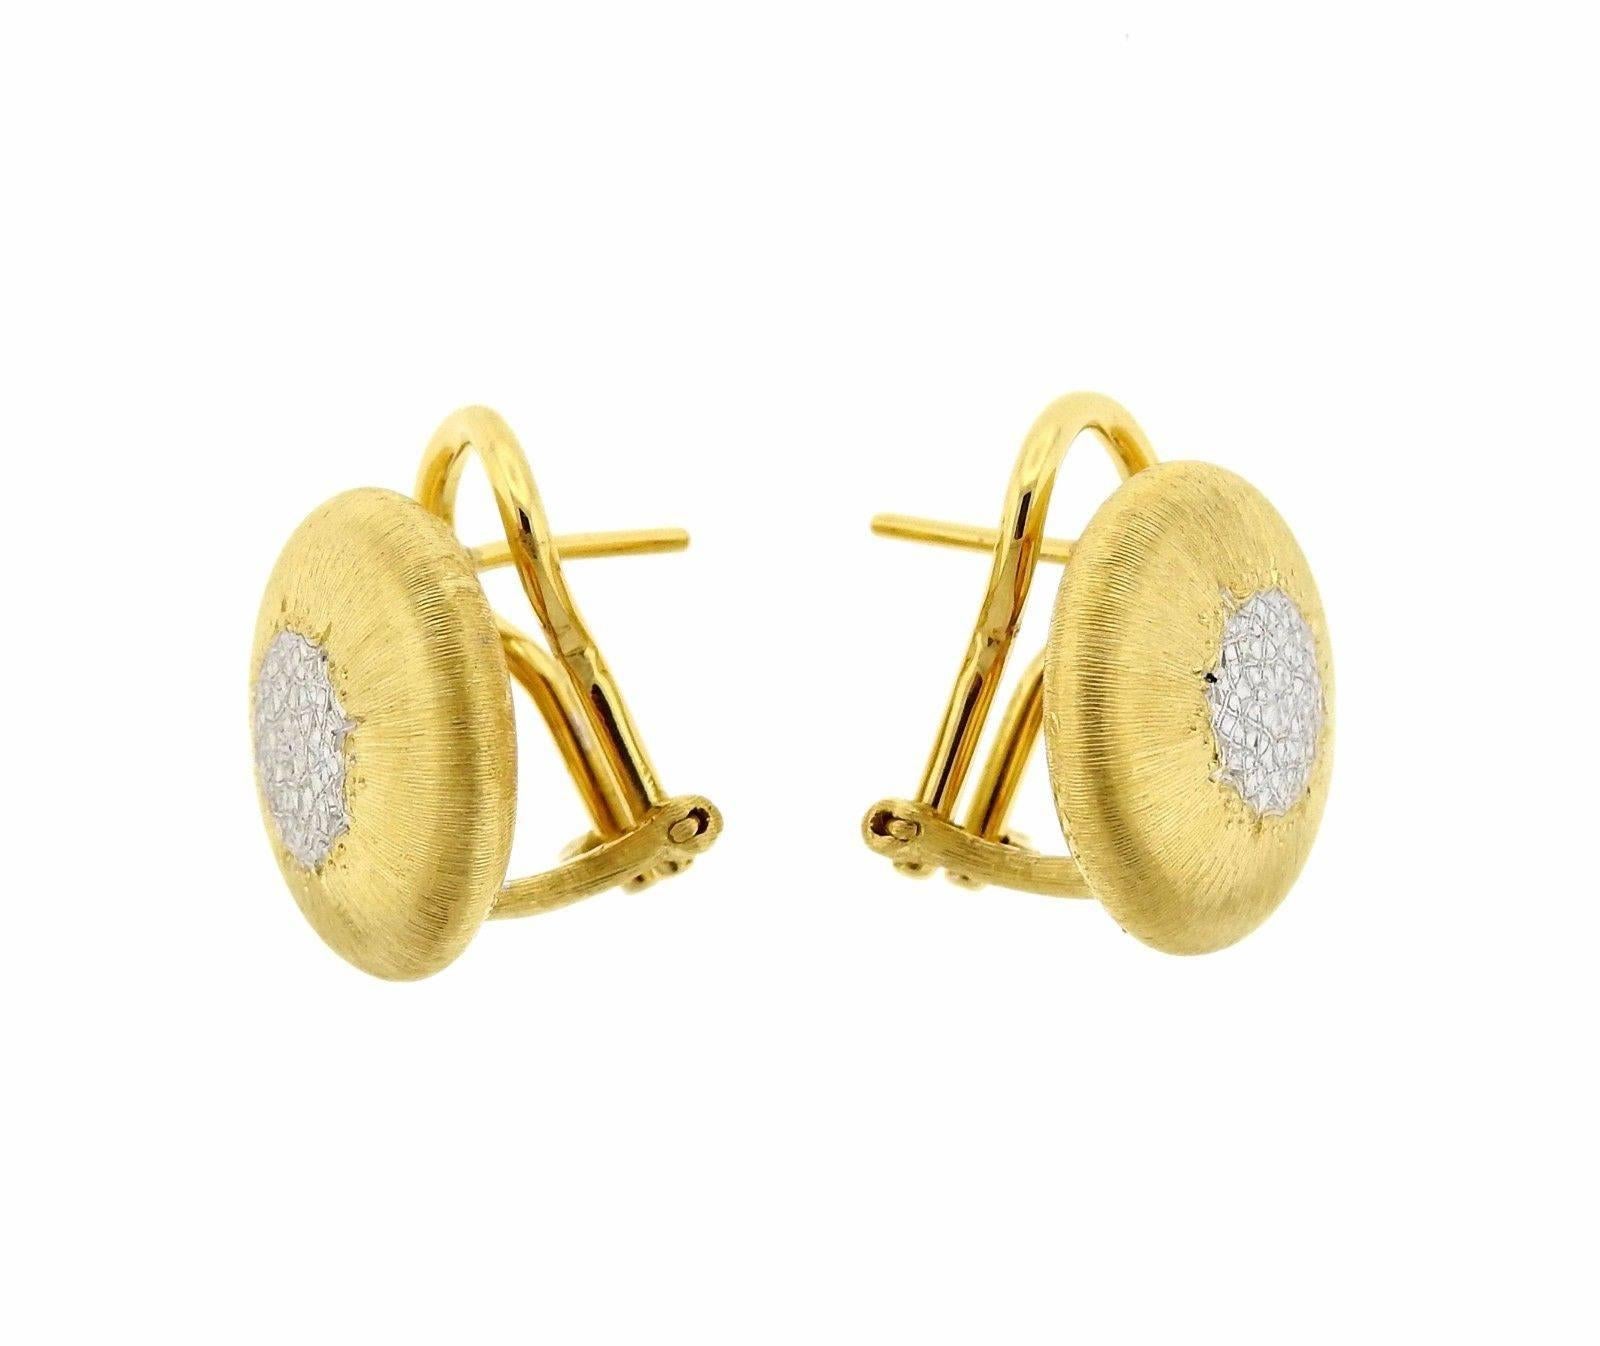 A pair of 18k yellow and white gold earrings by Buccellati.  The earrings measure 14.5mm in diameter and weigh 8.4 grams.  Marked: 18k, Italy, Buccellati.  Earrings come with Buccellati paperwork and box.  Current retail is $6730.